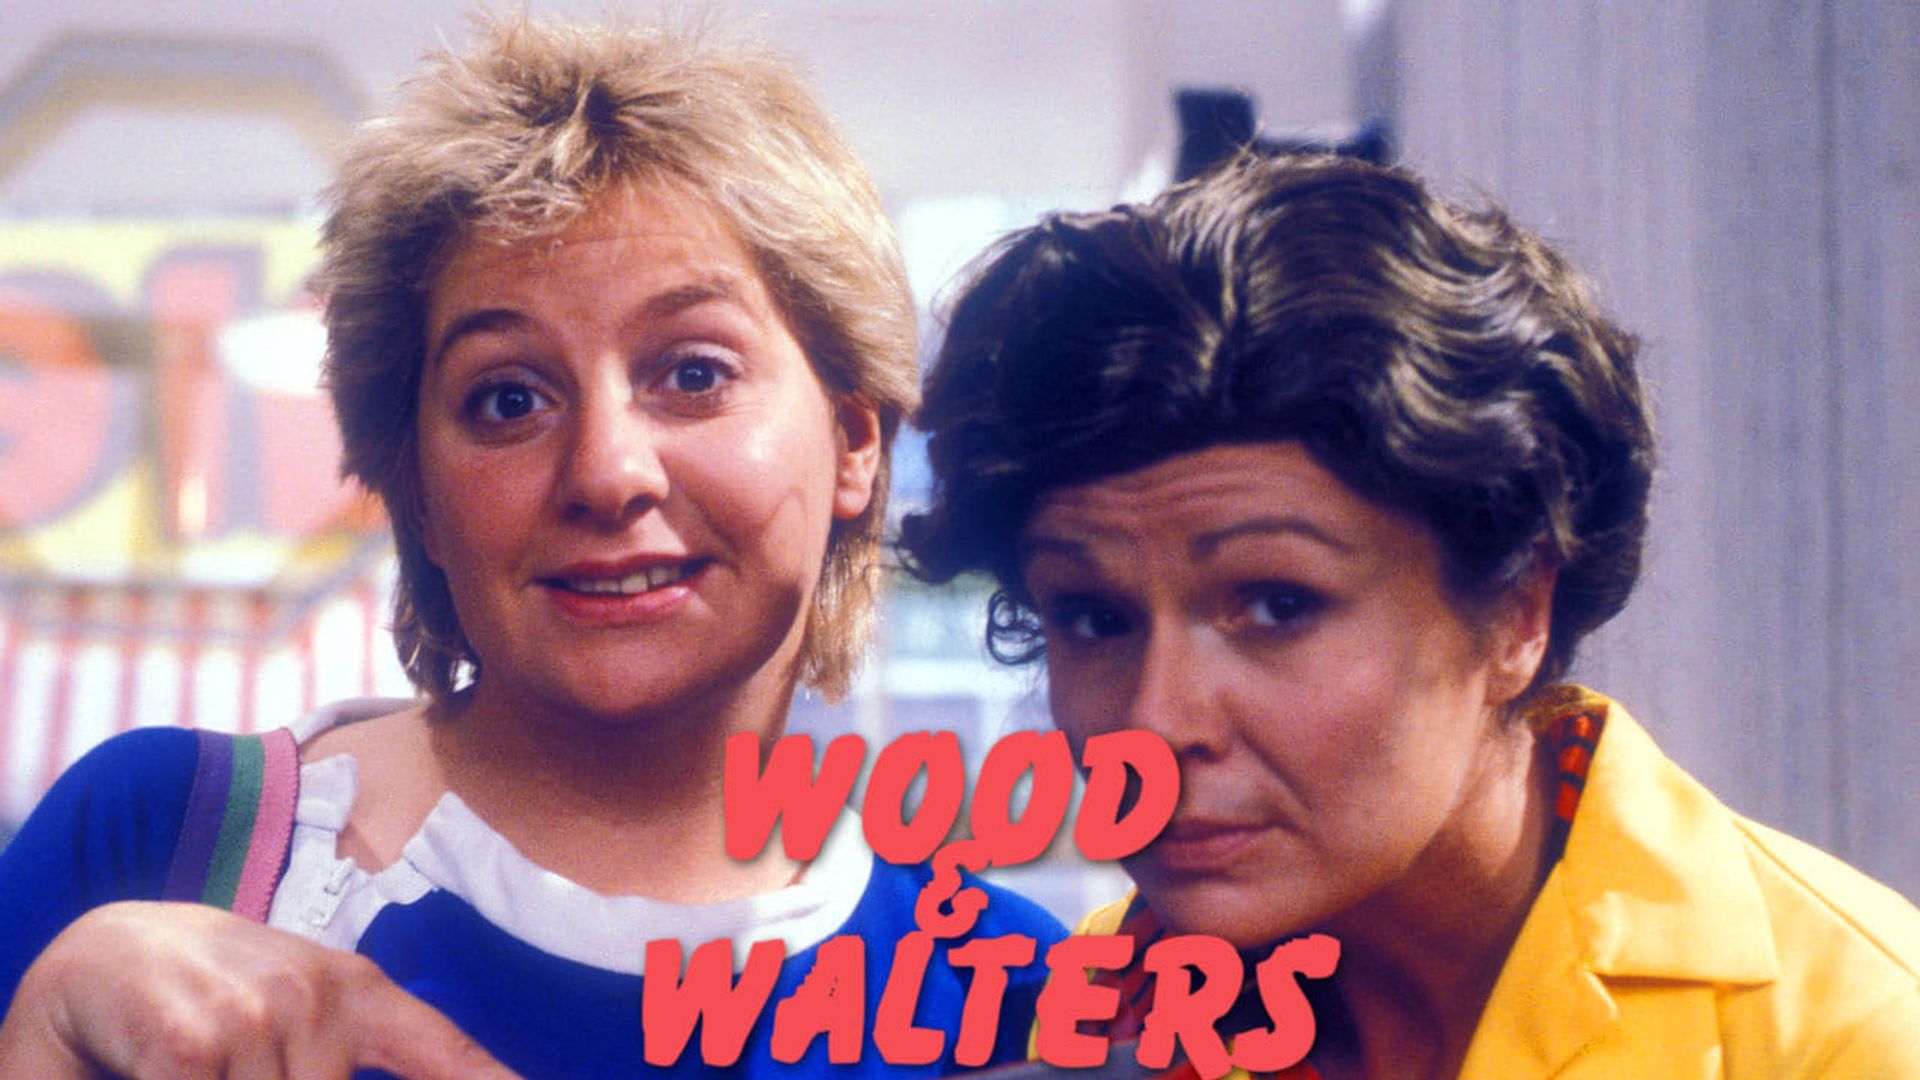 Wood and Walters background